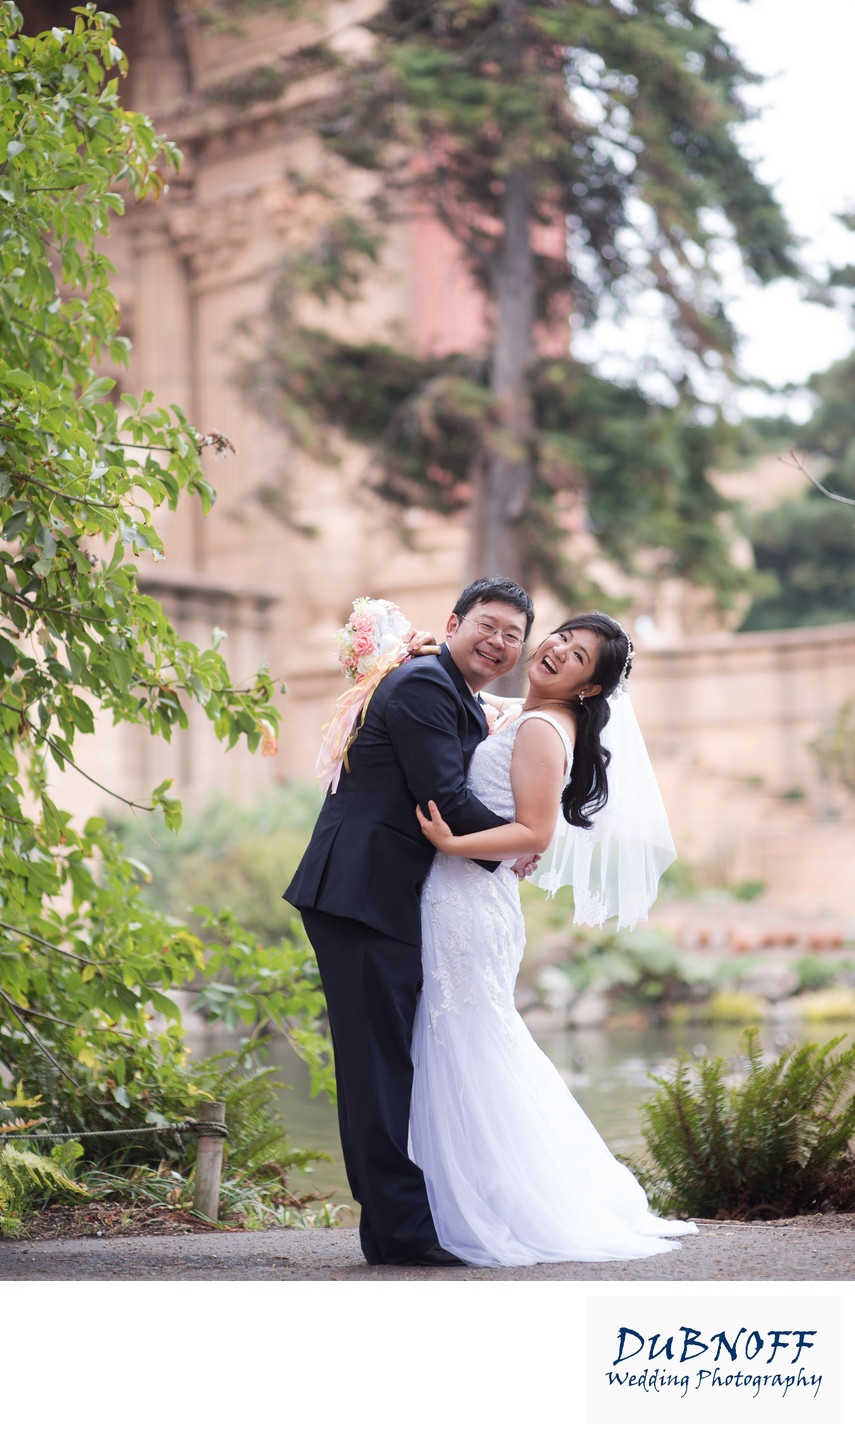 Fun Wedding Photography at the Palace of Fine Arts in SF